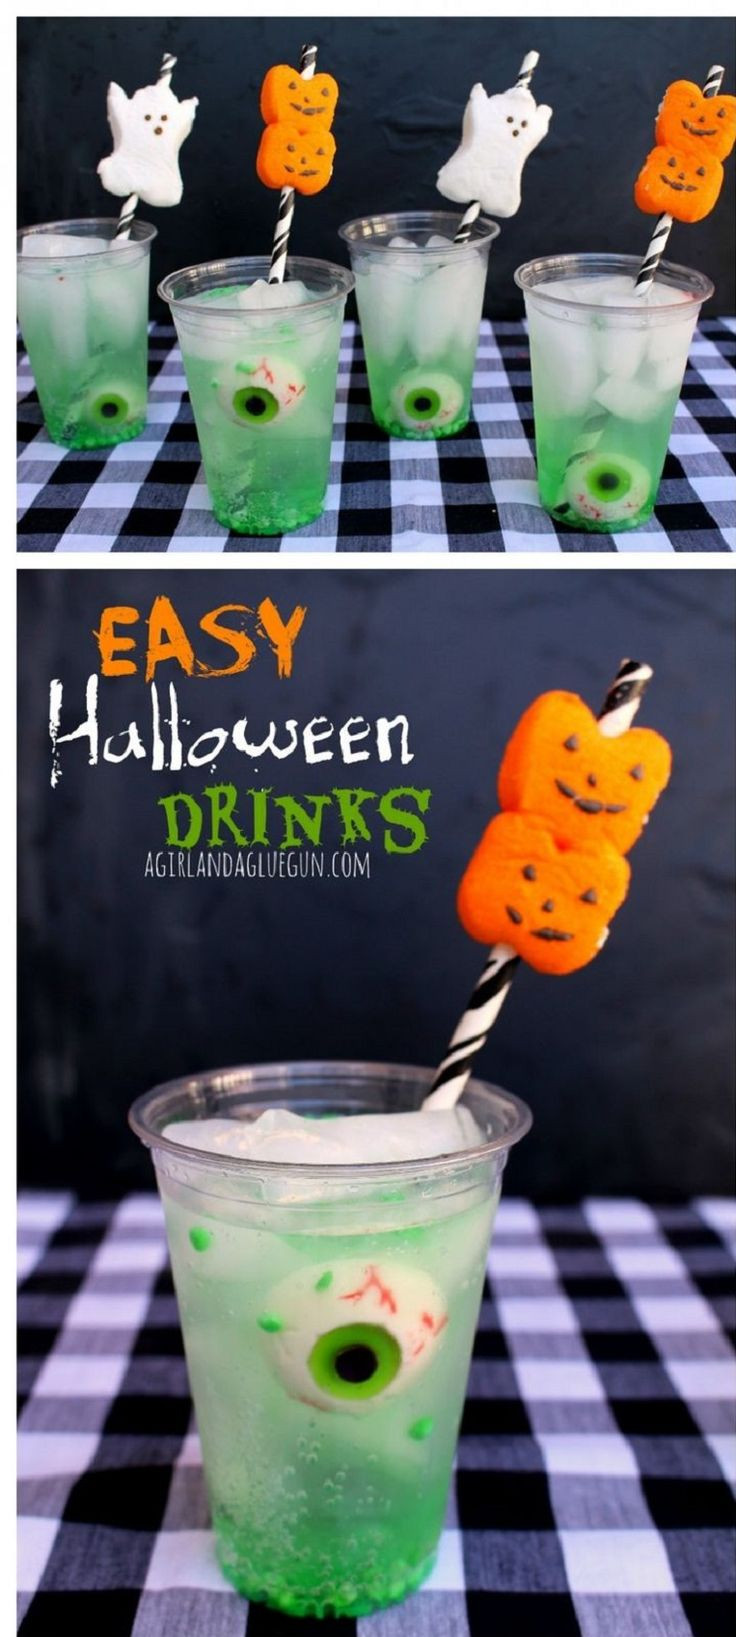 Halloween Drinks Non Alcoholic
 Pin by Lucia Moraes on Bruxas